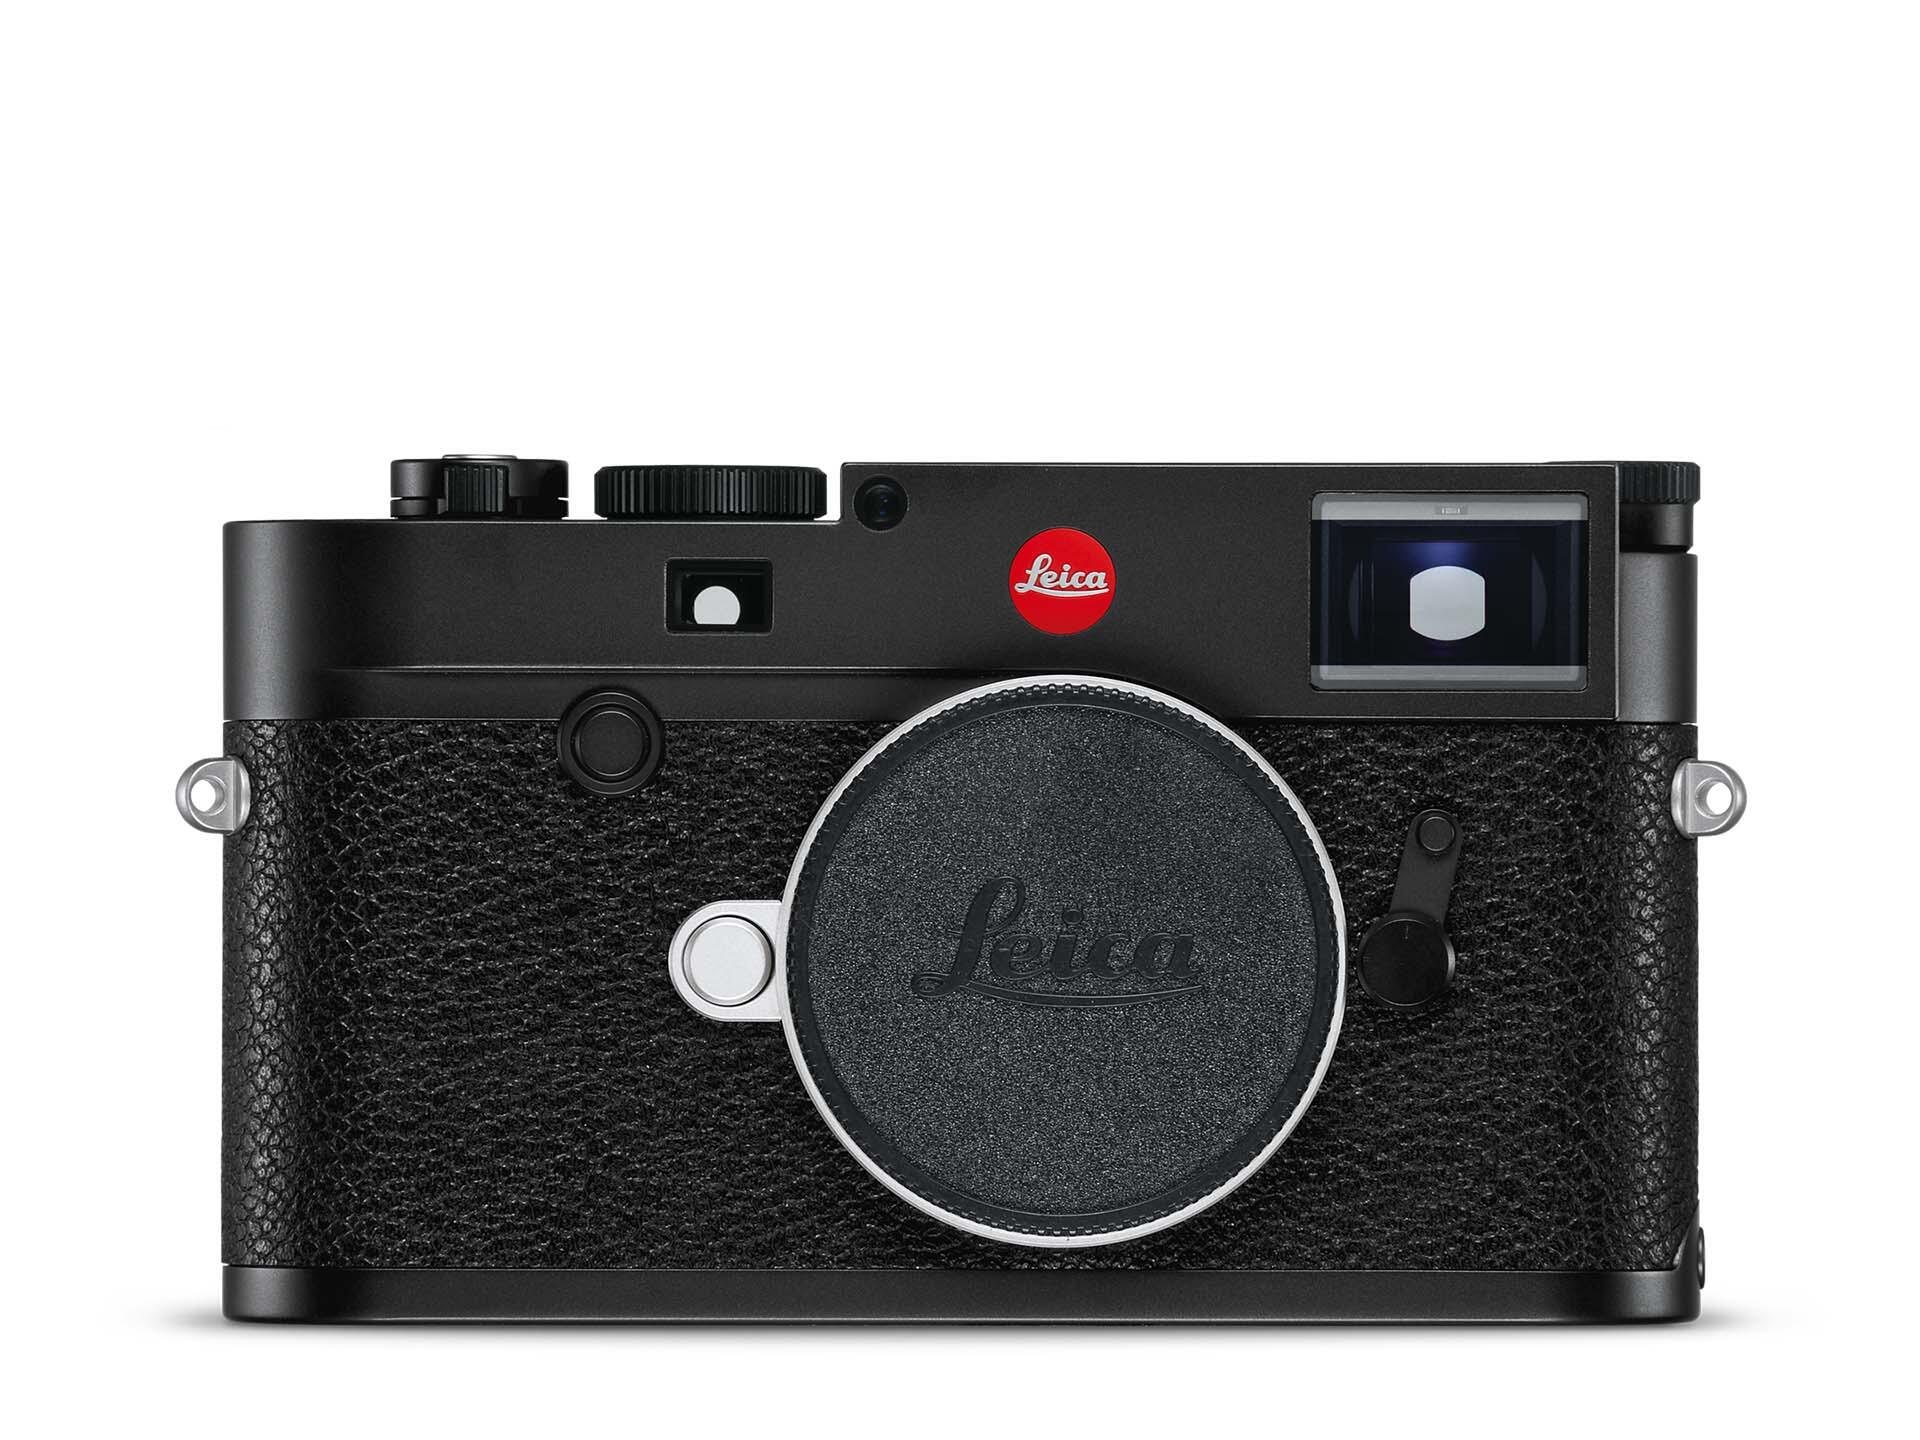 Leica M10-D replacement leatherette cover pre-cut self-adhesive